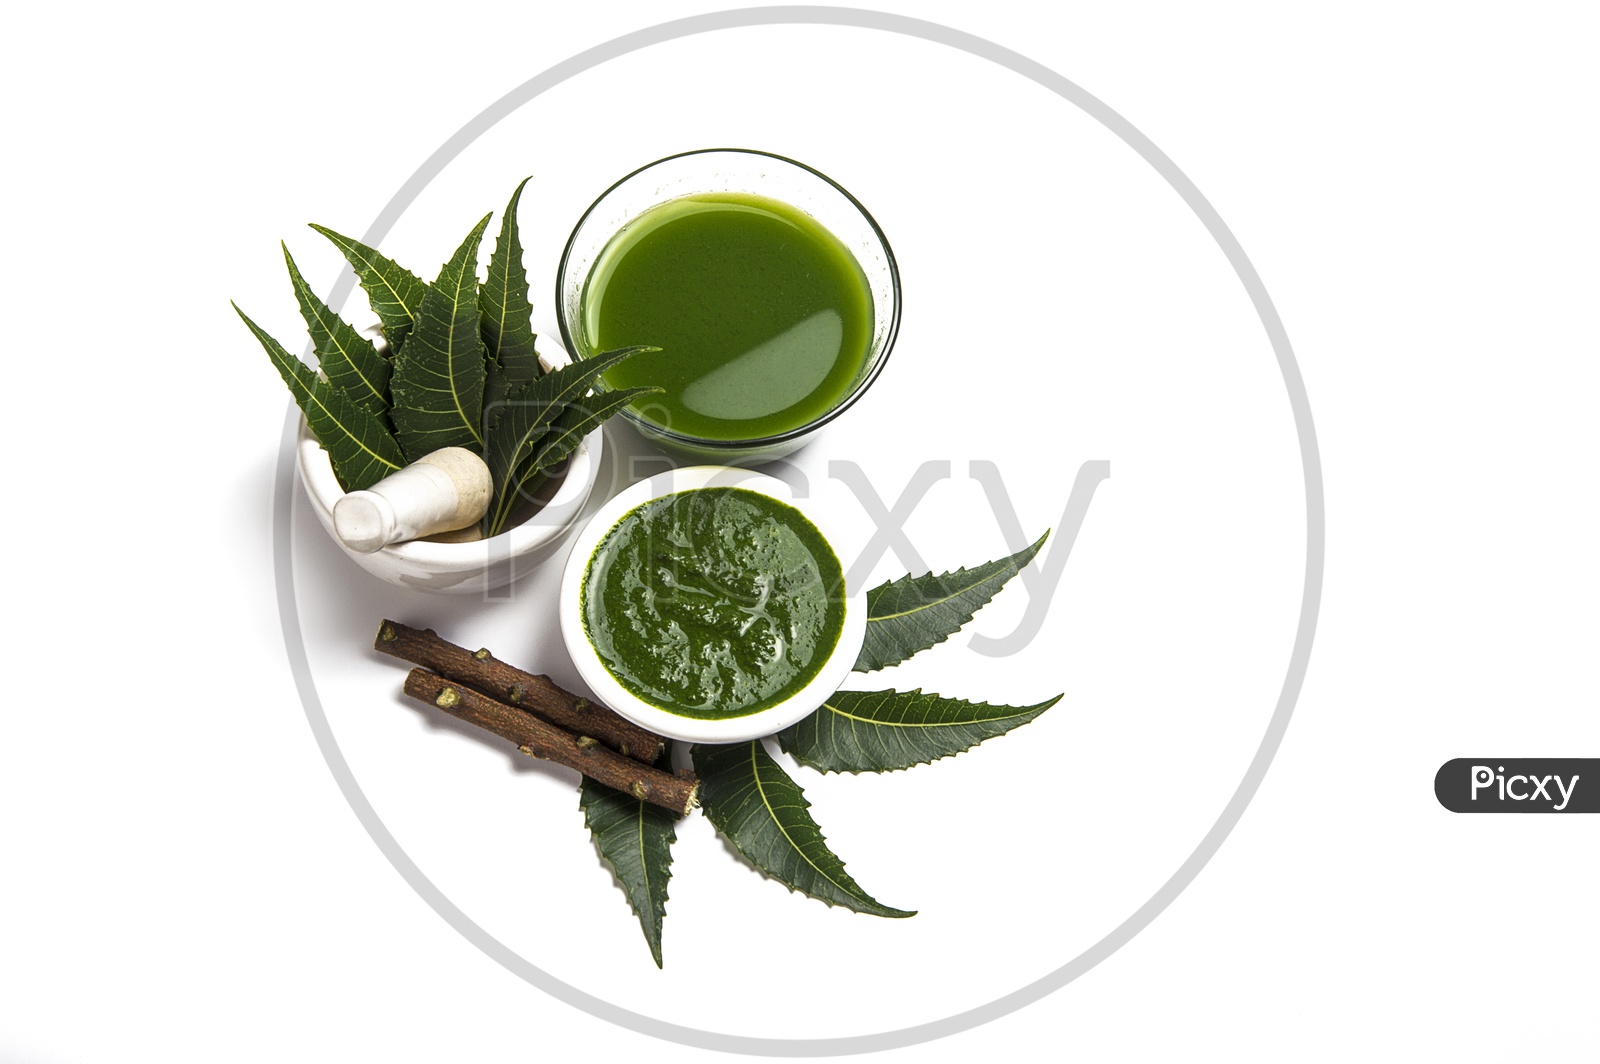 Medicinal Neem leaves in mortar and pestle with neem paste, juice and twigs on white background